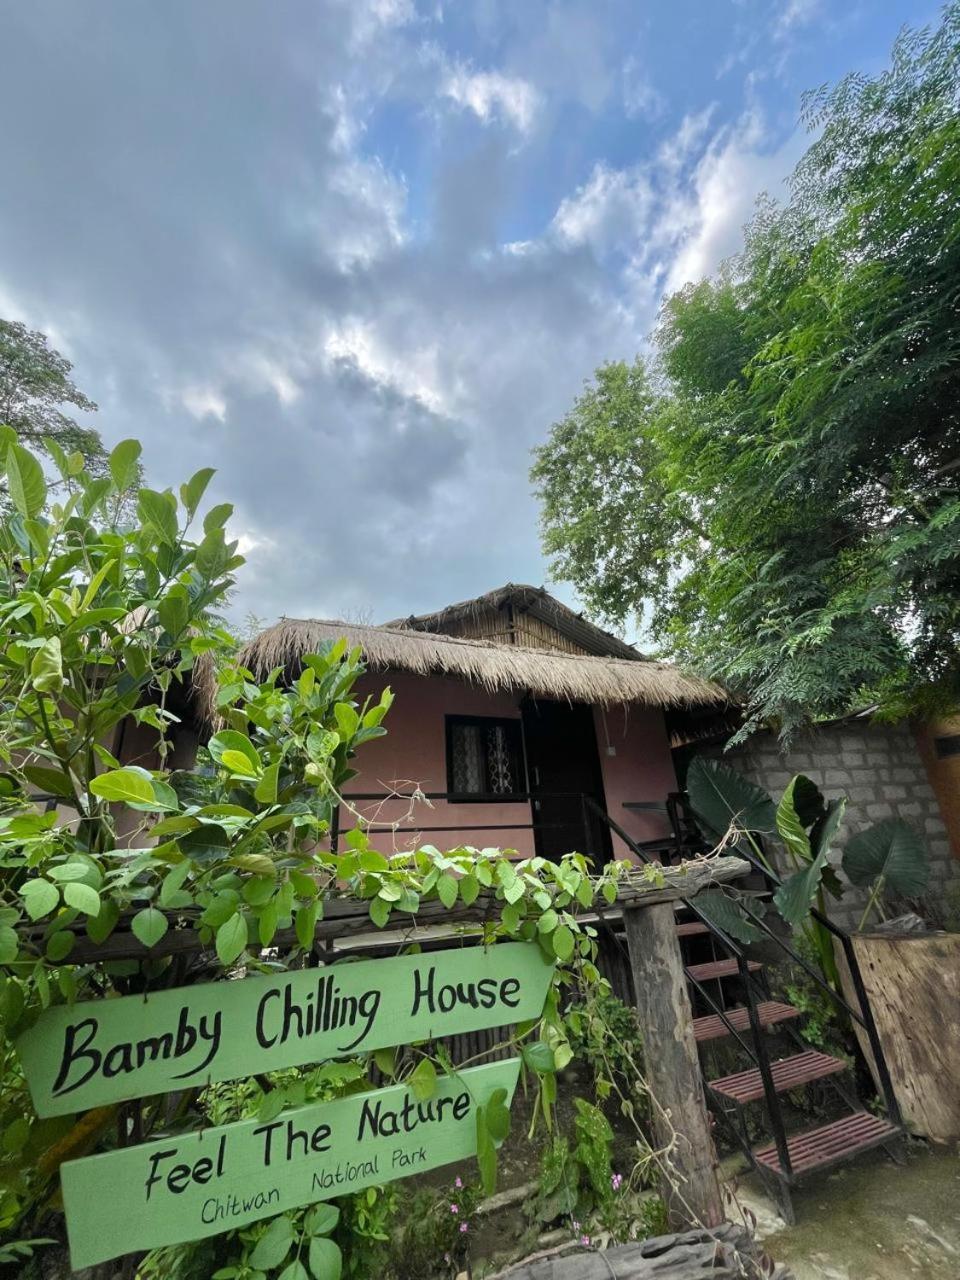 Bamby Chilling House - Feel The Nature 索拉哈 外观 照片